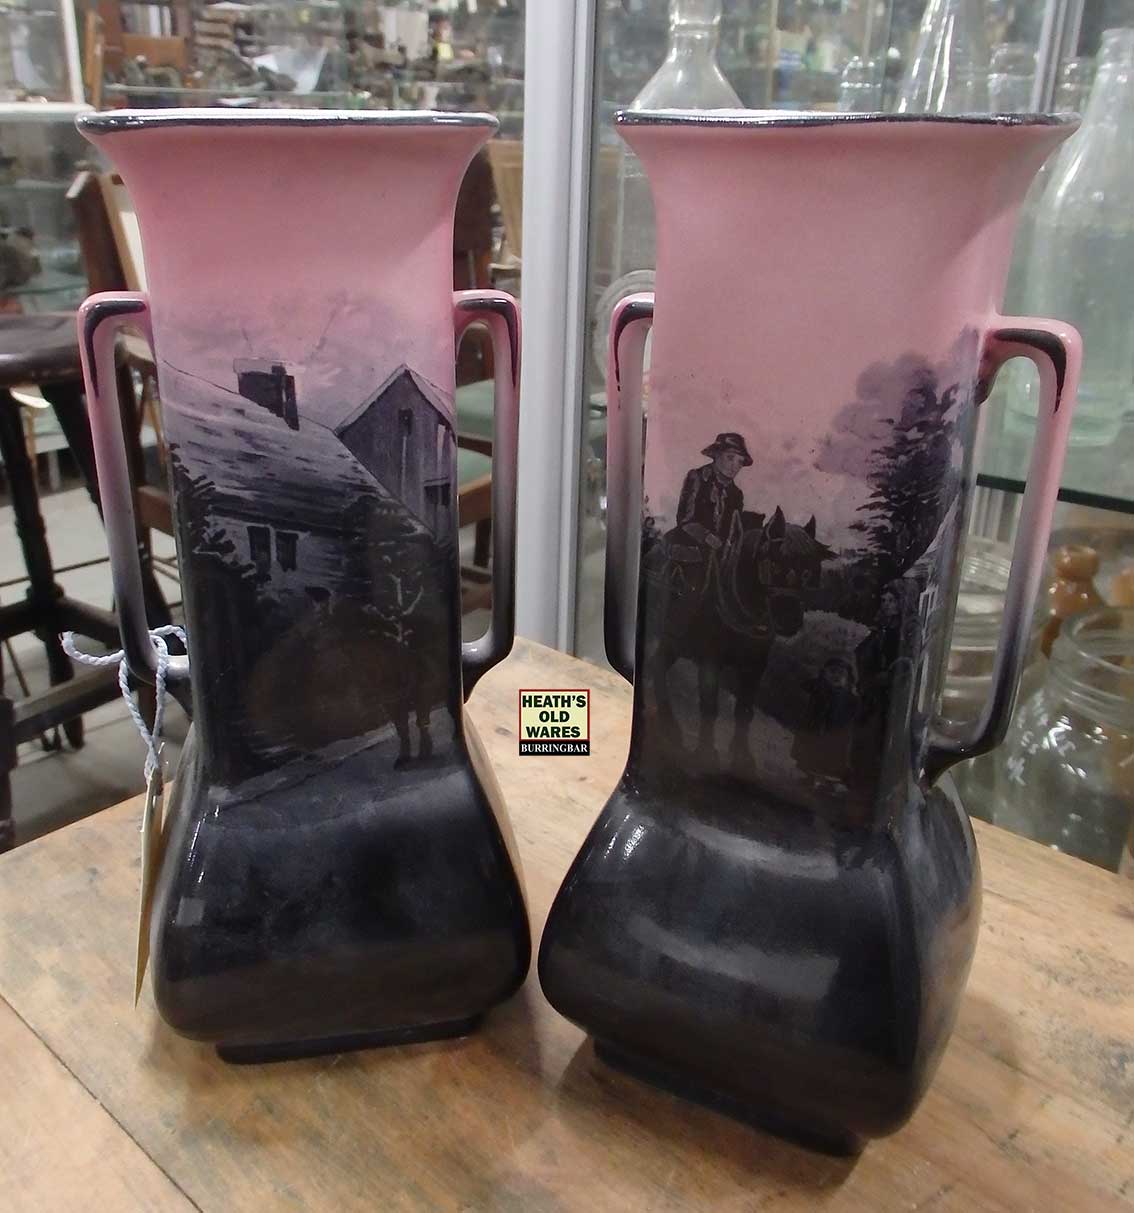 Horse and Dray pink & black vases, mase in England, stamped 425 1903  for sale at Heaths Old Wares, Collectables, Antiques & Industrial Antiques, 19-21 Broadway, Burringbar NSW 2483 Ph 0266771181 open 7 days